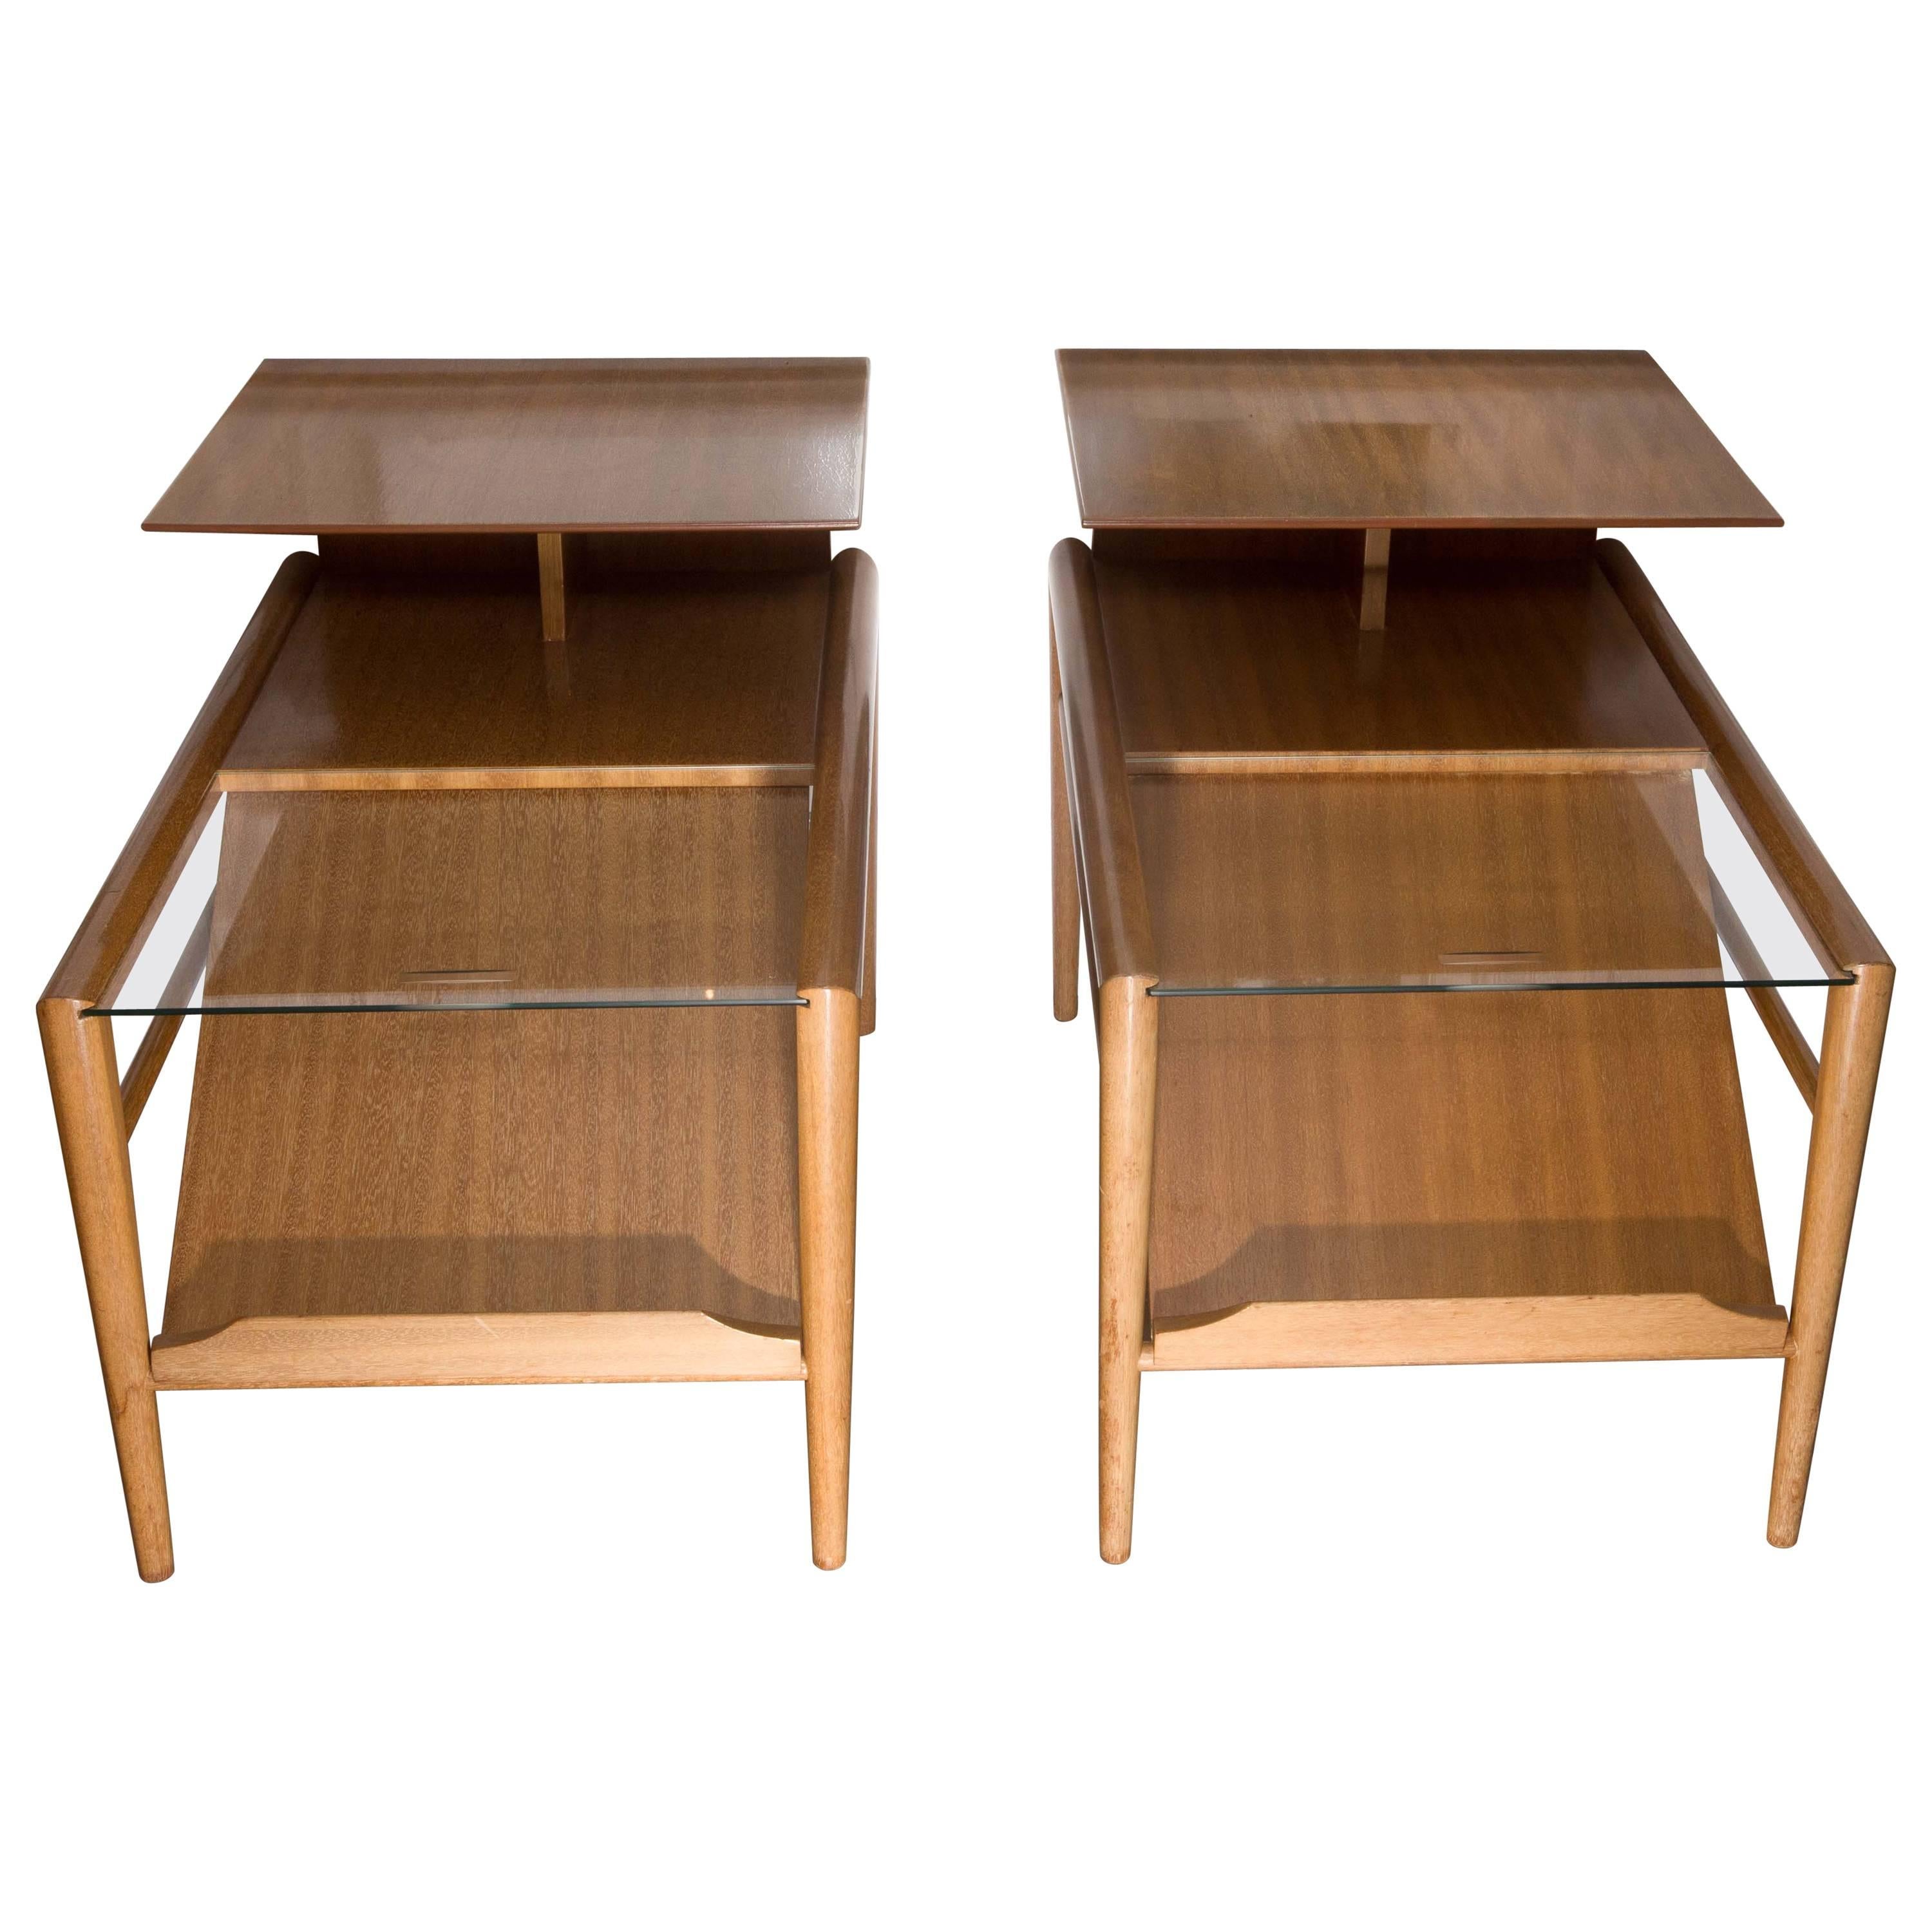 Pair of Step End Wood Tables with Sliding Glass Feature by Saltman